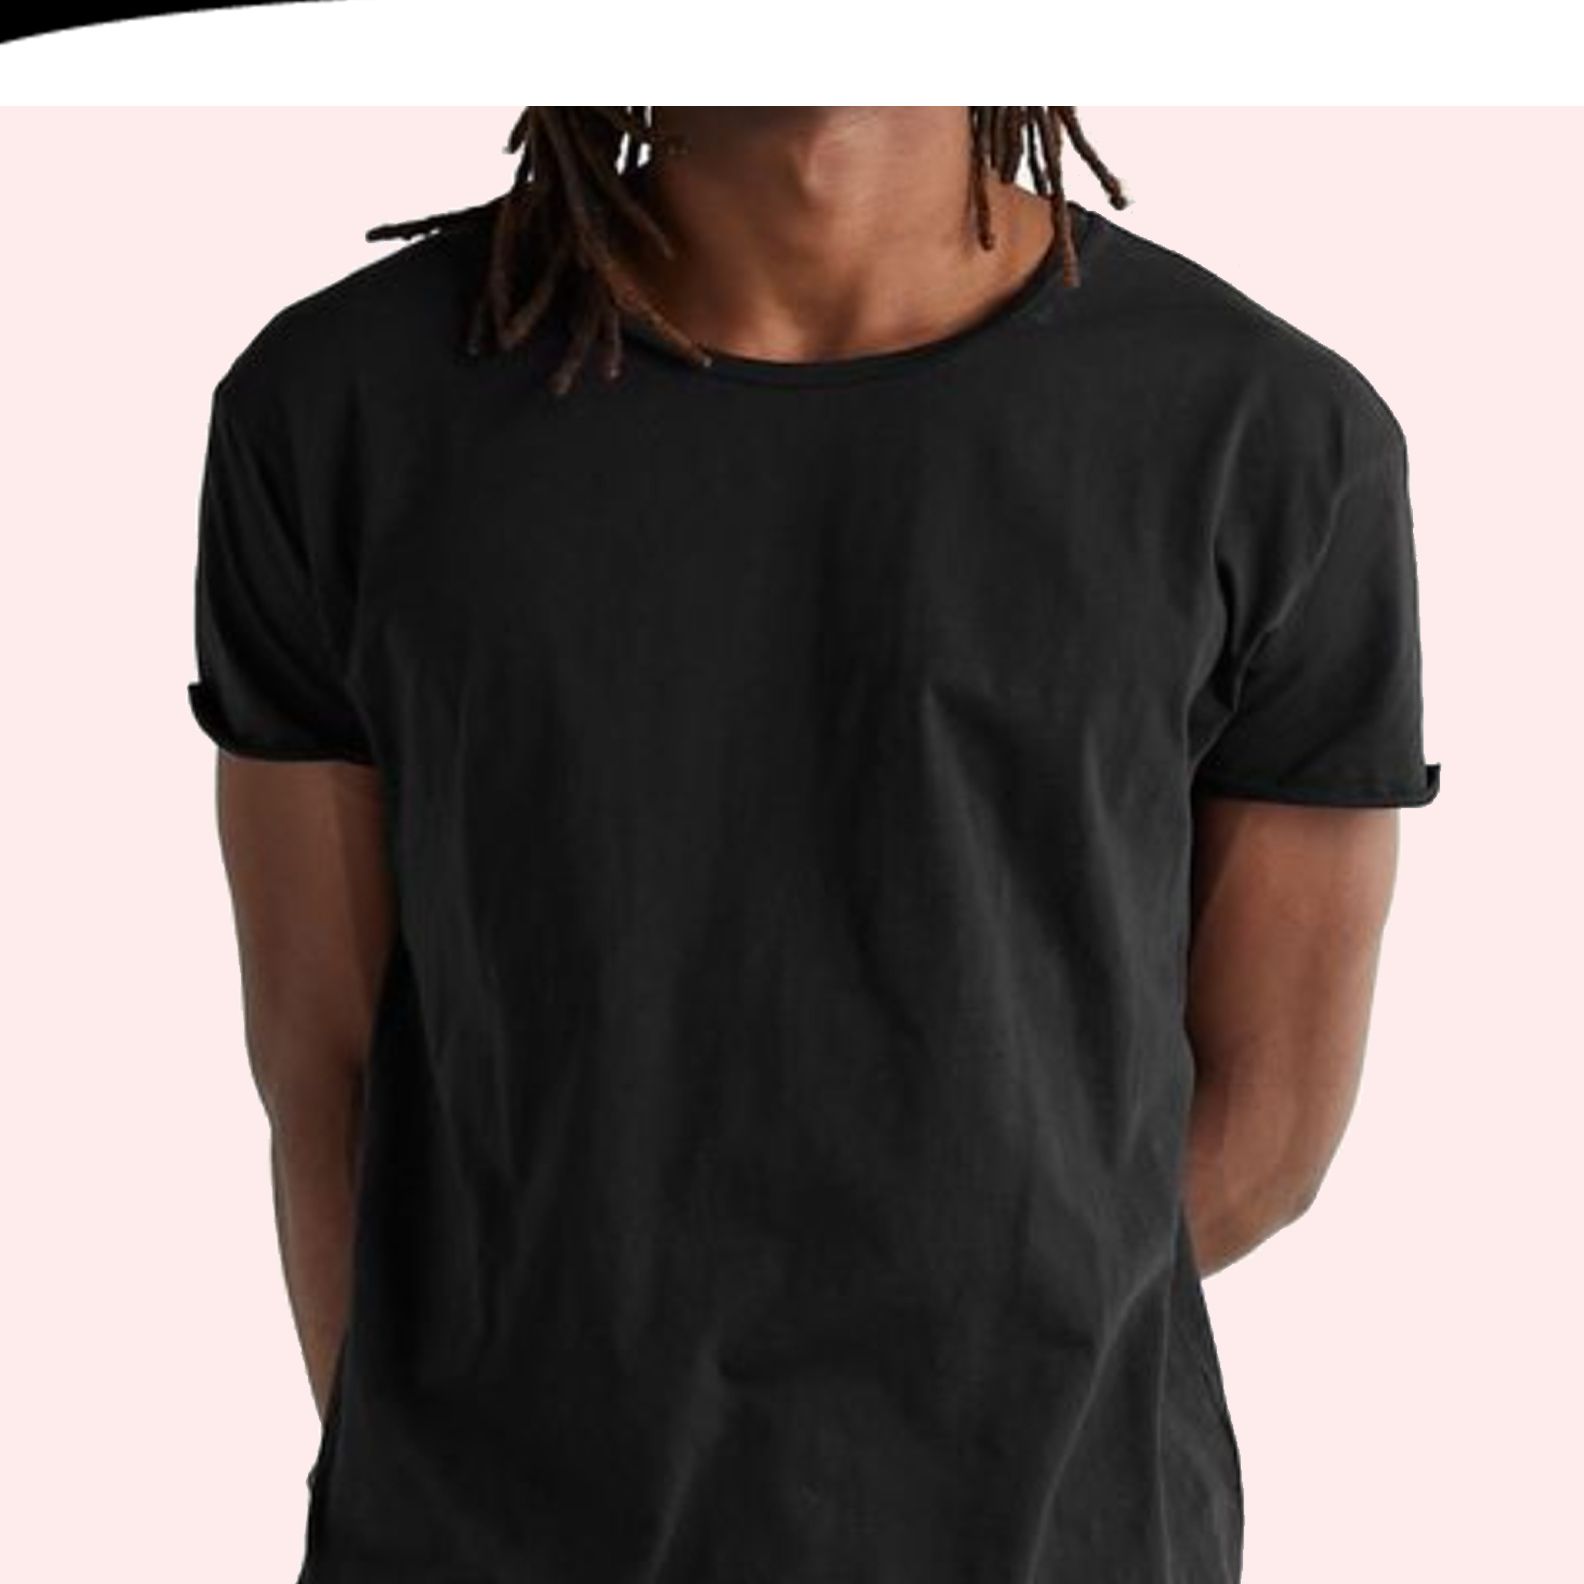 The 20 Black T-Shirts to Stock Up On